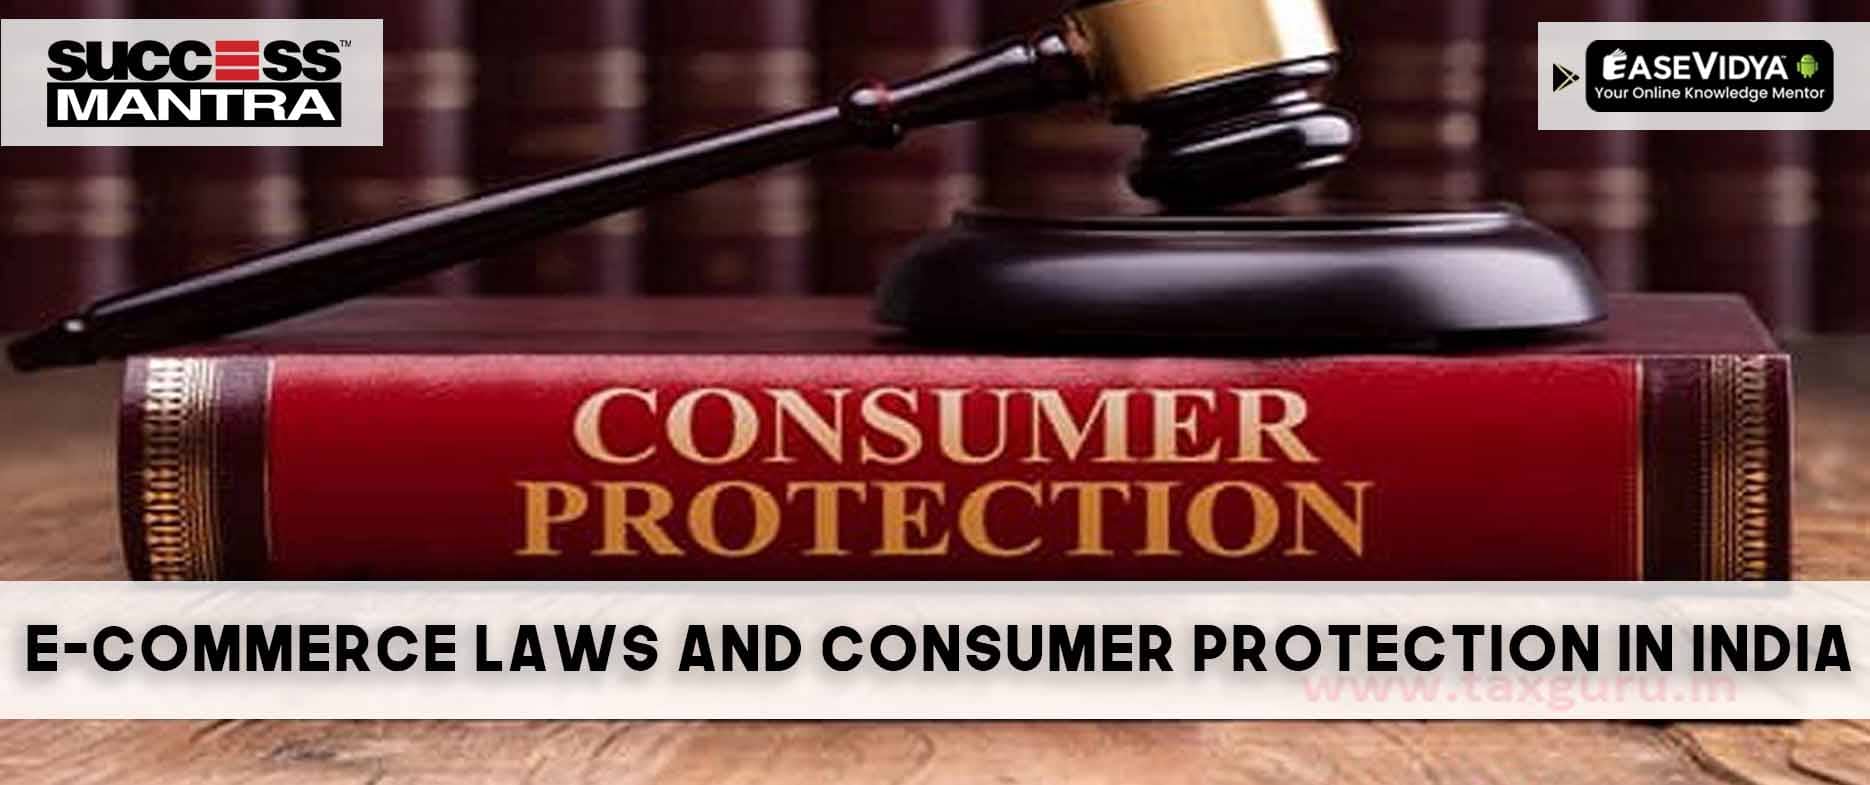  Navigating the Legal Landscape: E-Commerce Laws and Consumer Protection in India